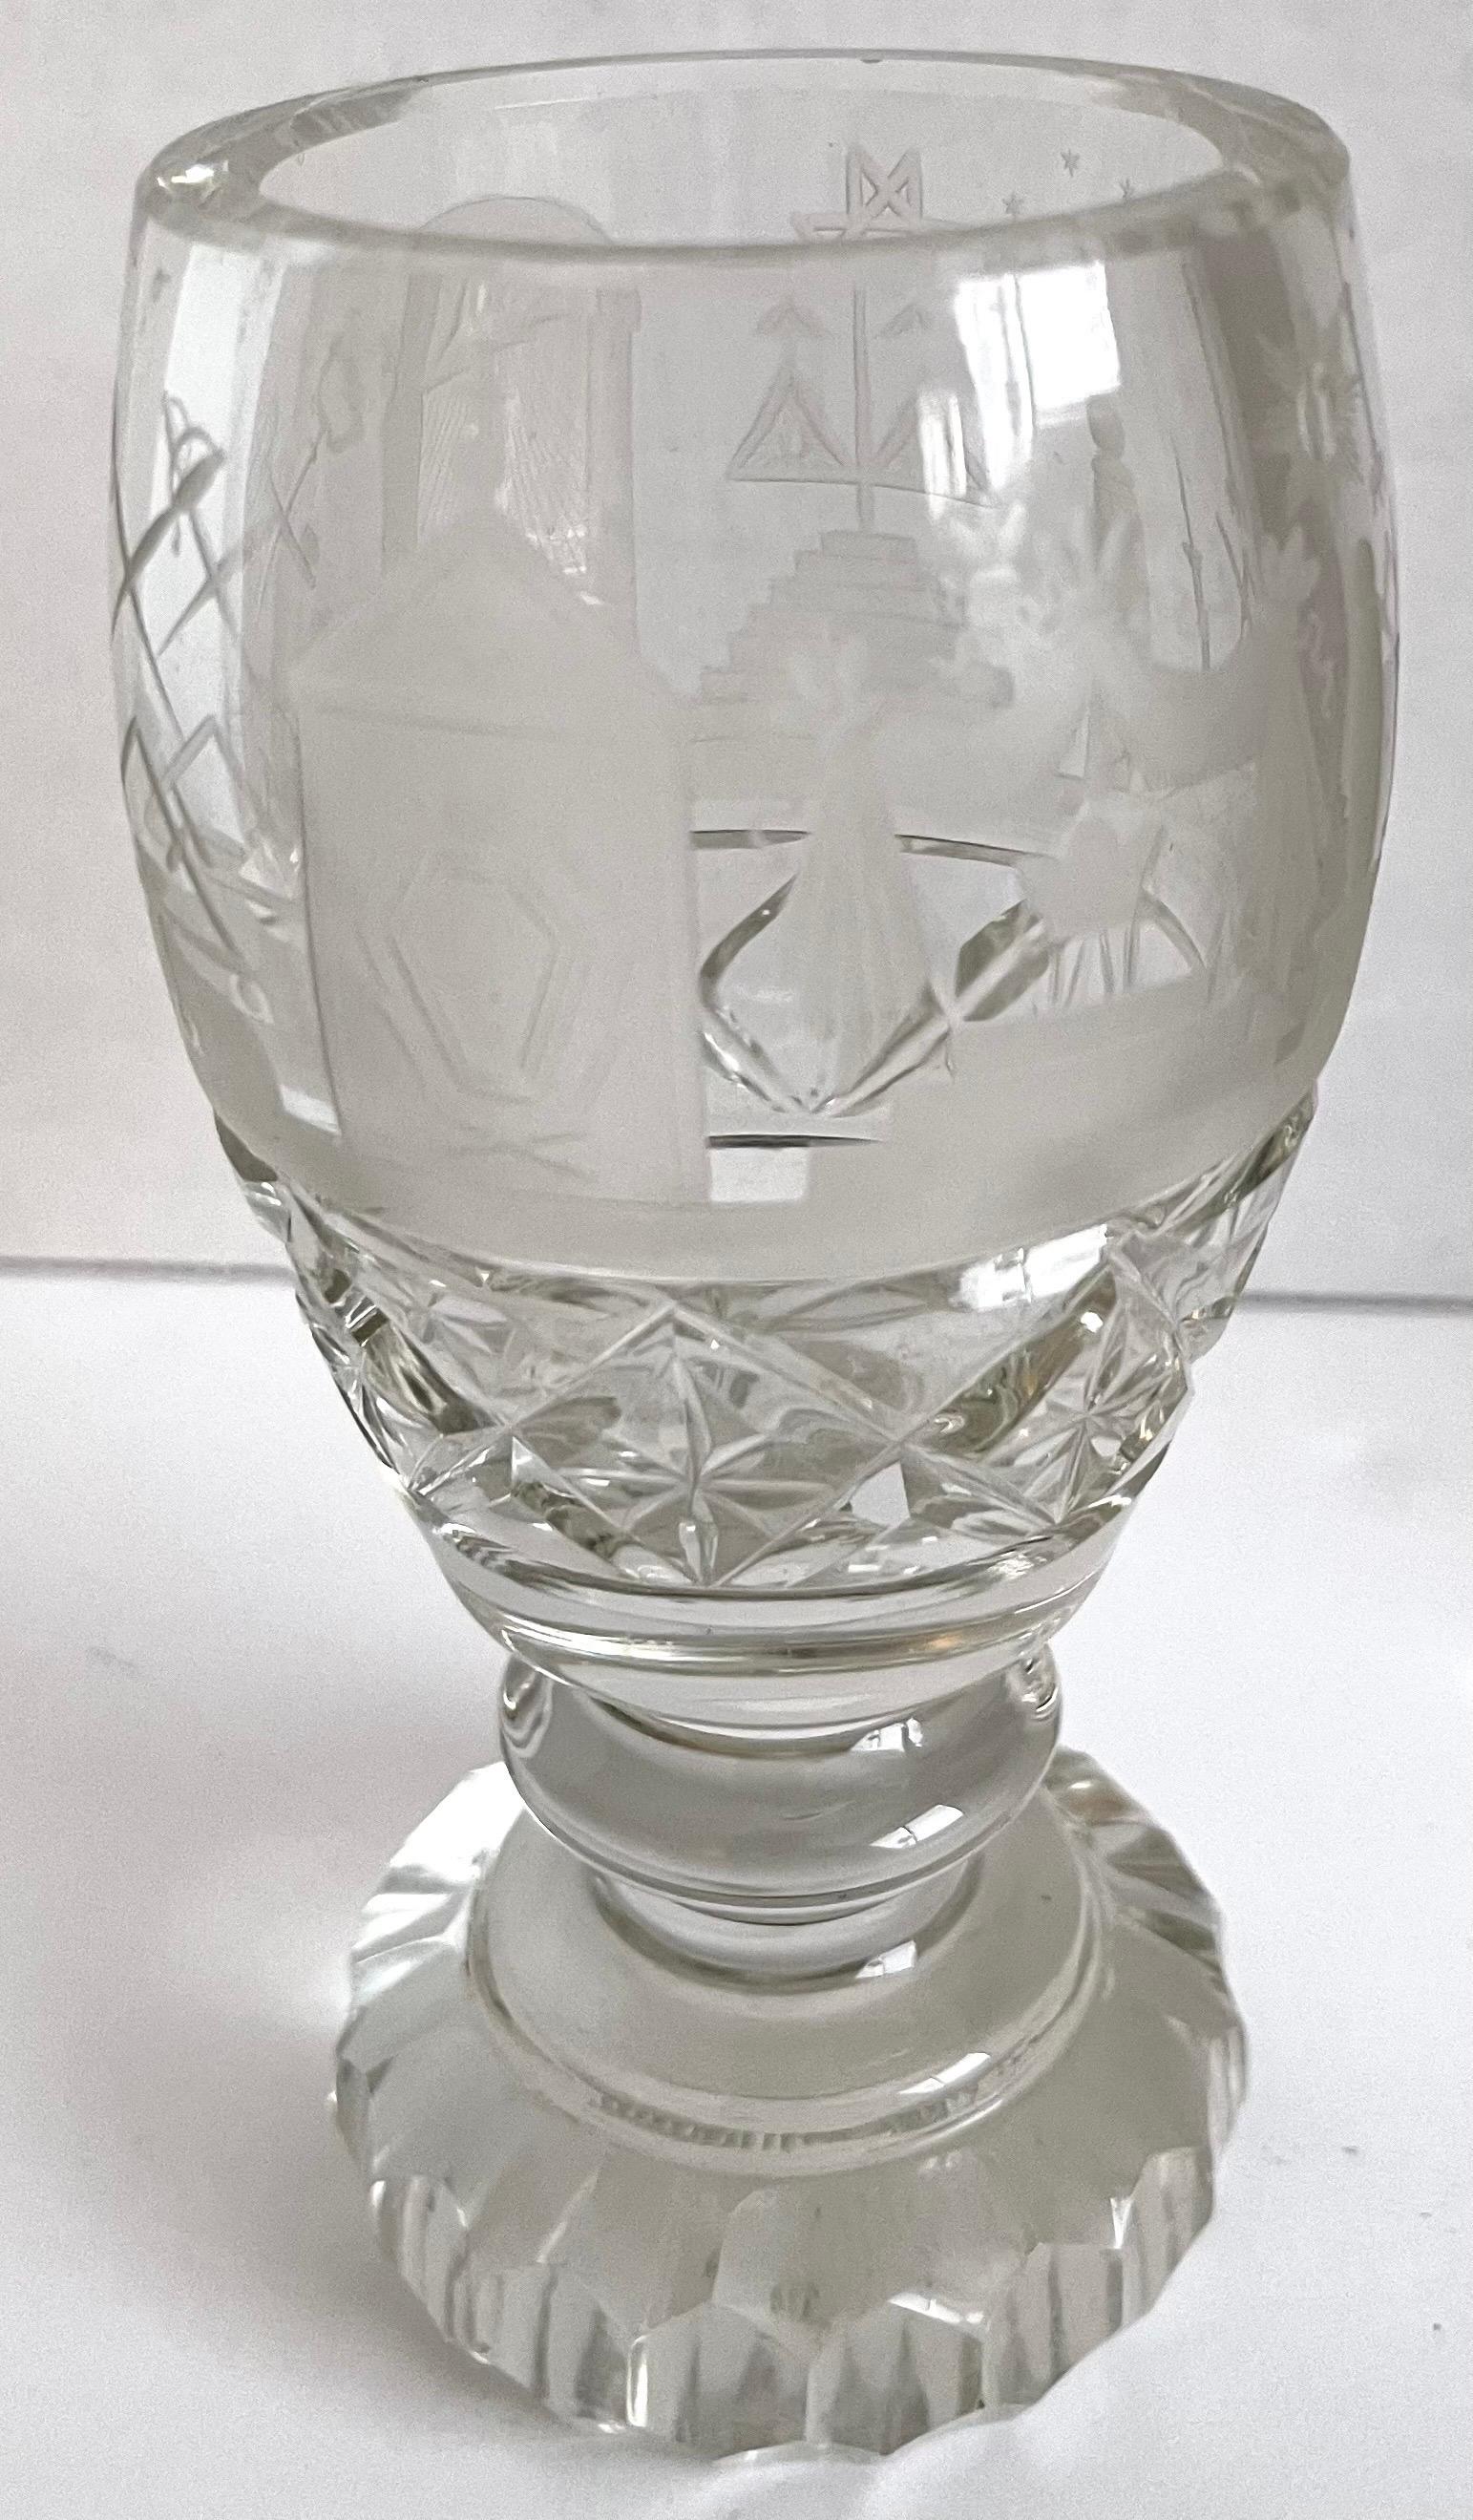 Etched Antique Masonic Cut Crystal Ceremonial Cup